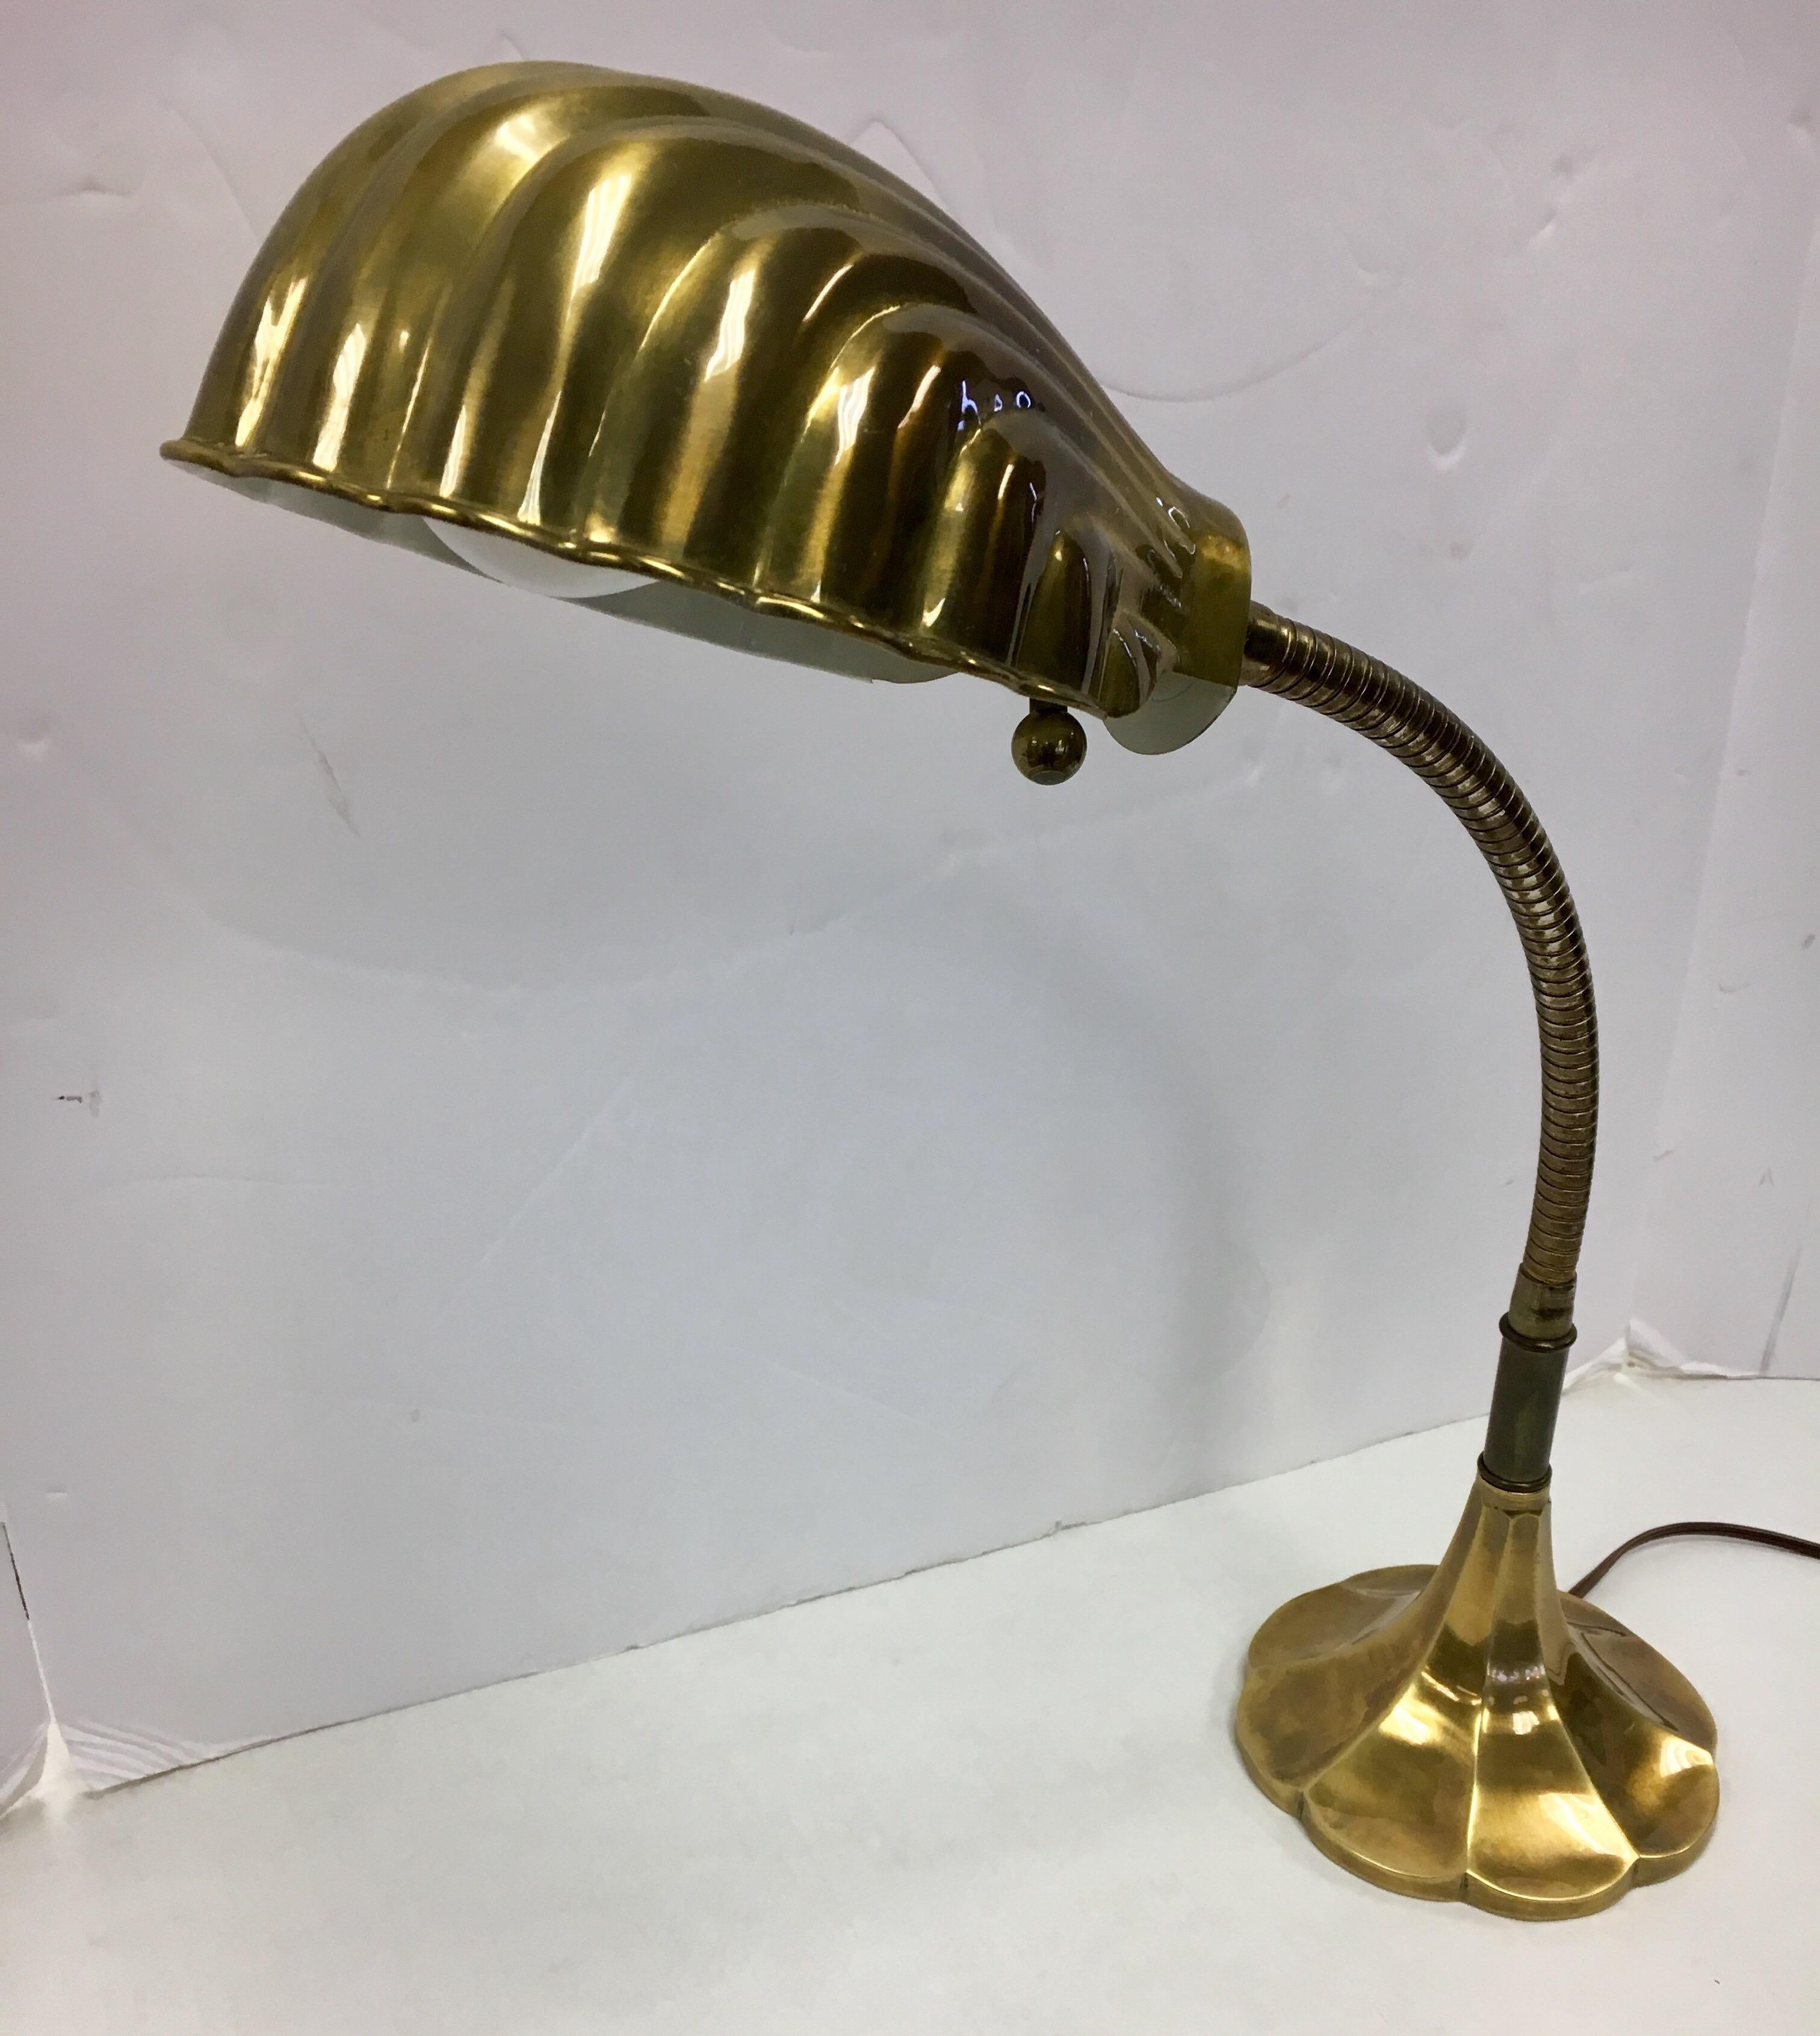 Rare Antonio Gaudi style lamp by Chapman features faux brass shell shade and bronze base with bendable neck. All Chapman hallmarks are present.